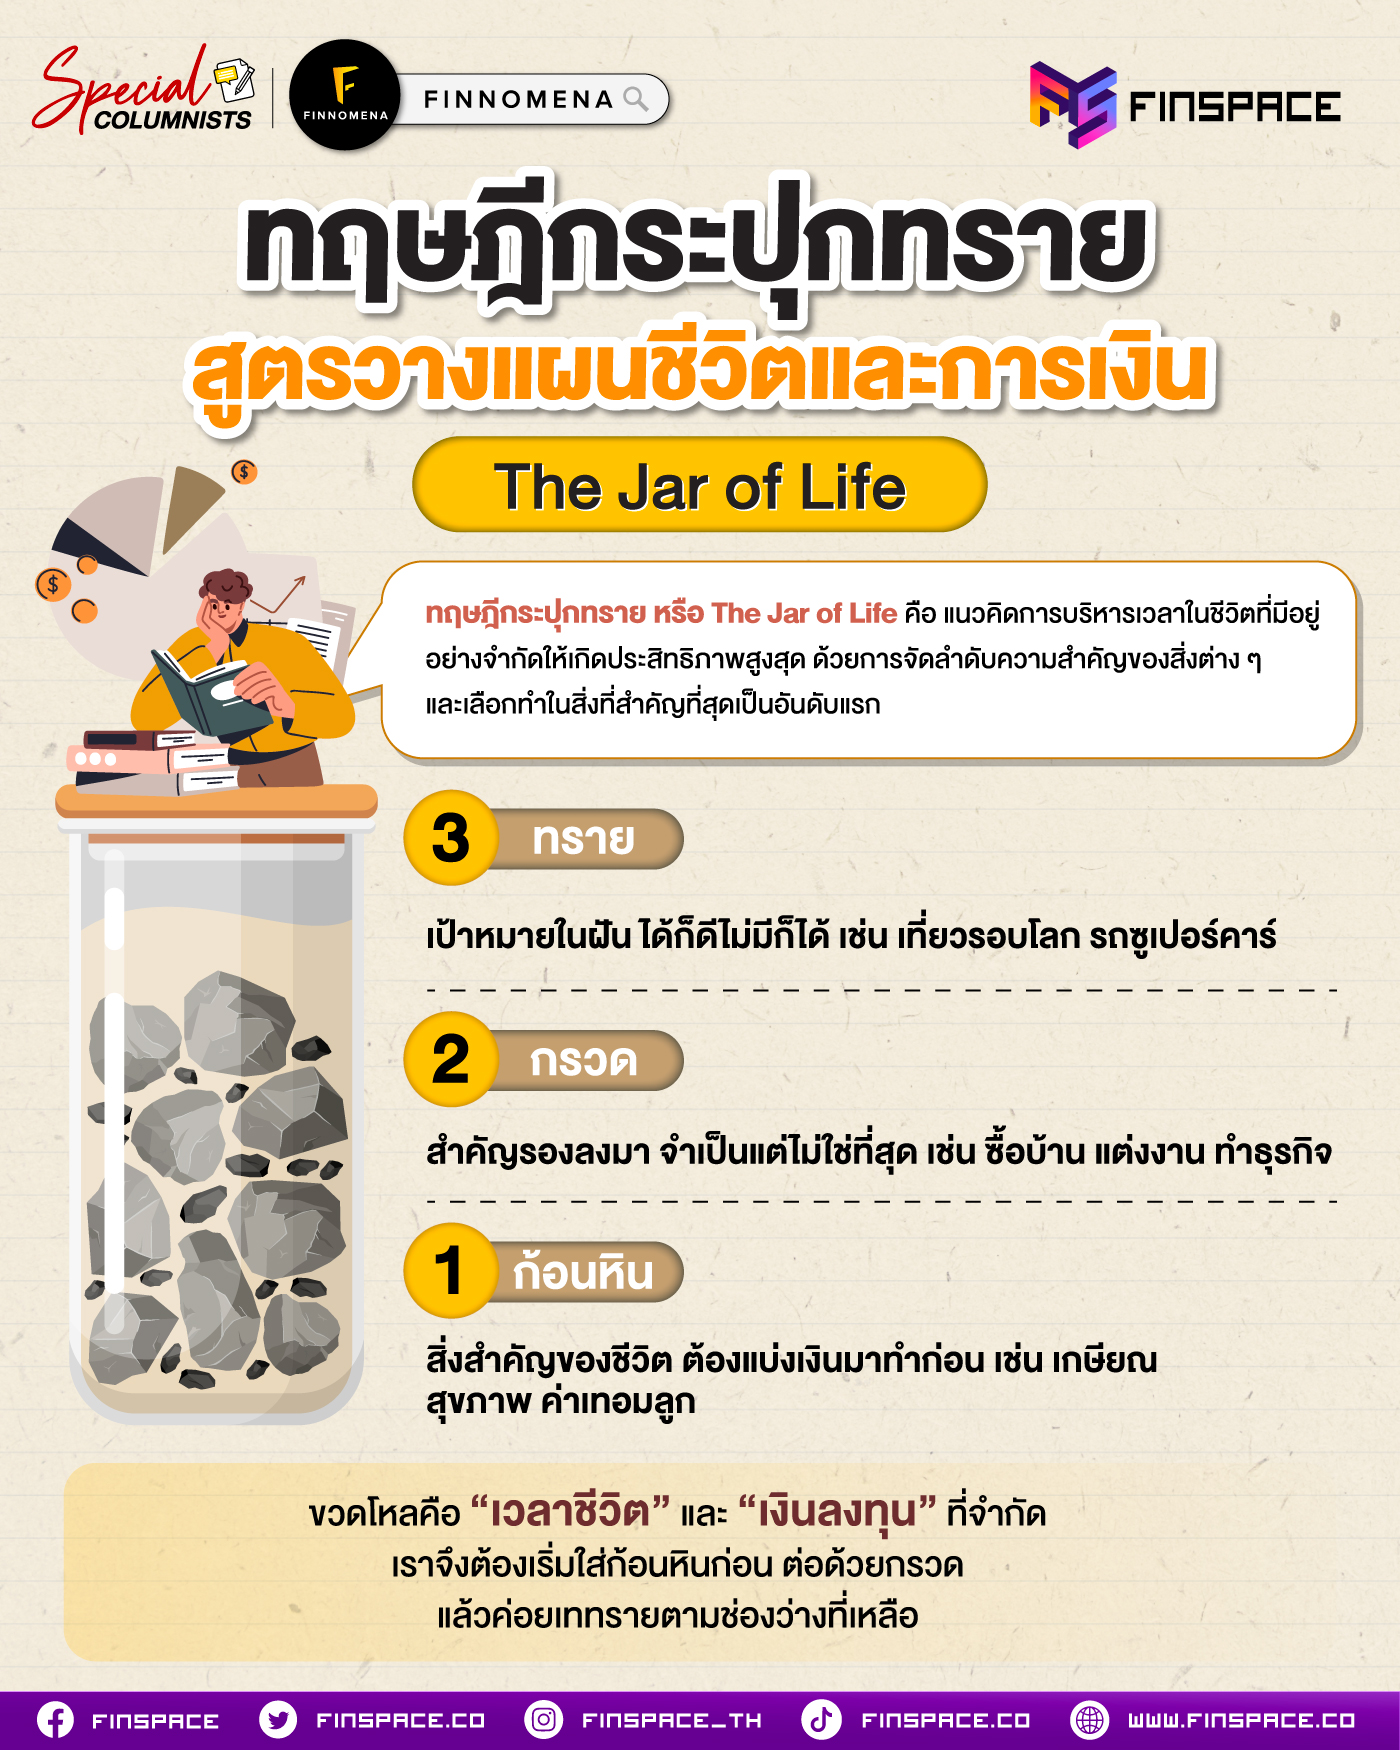 The Jar of Life